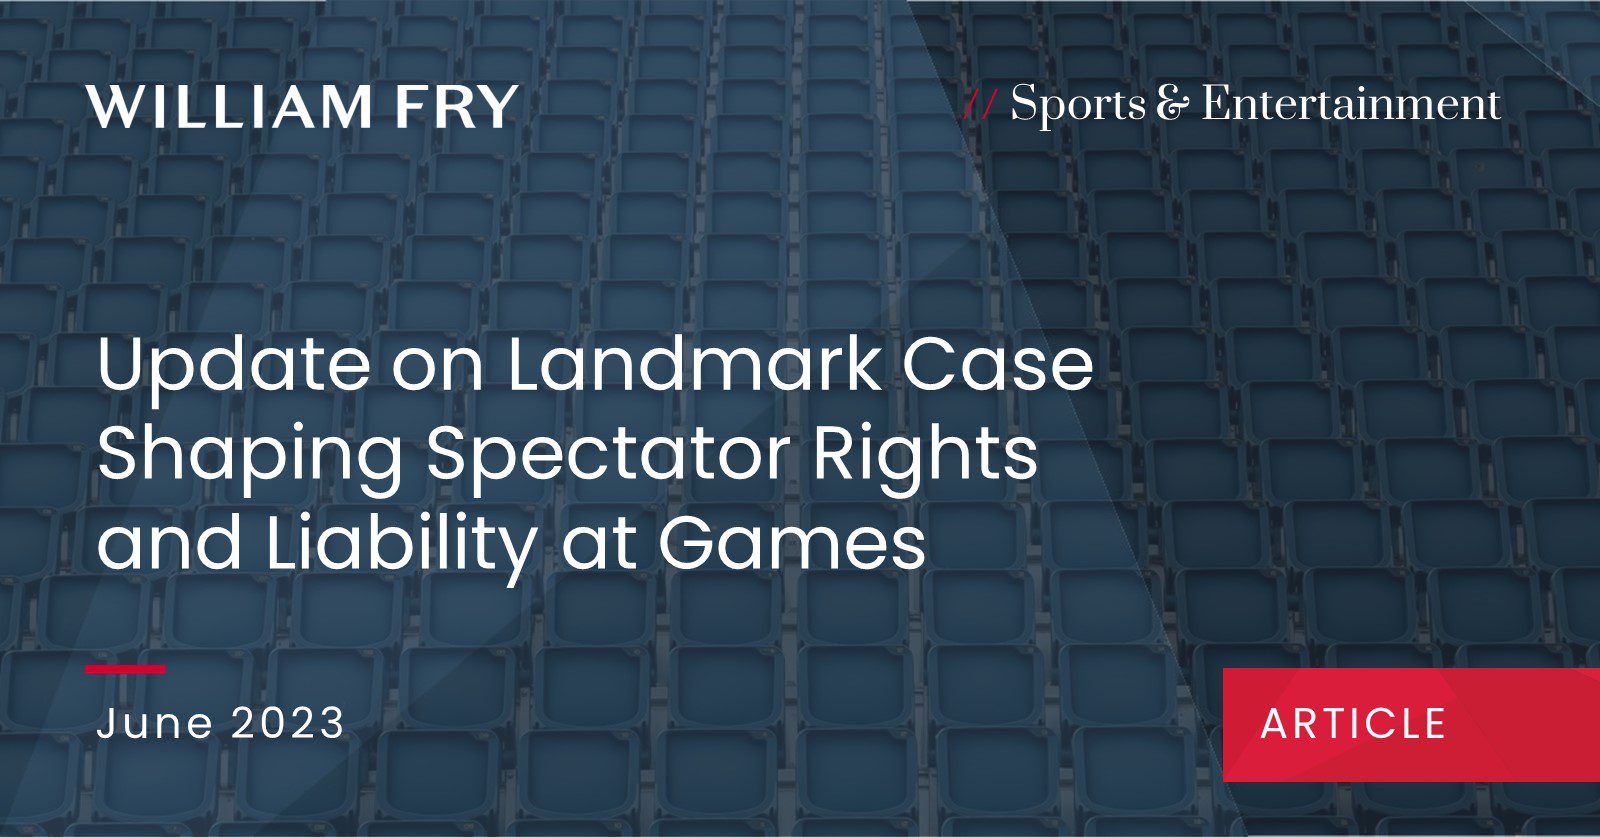 Update on Landmark Case Shaping Spectator Rights and Liability at Games